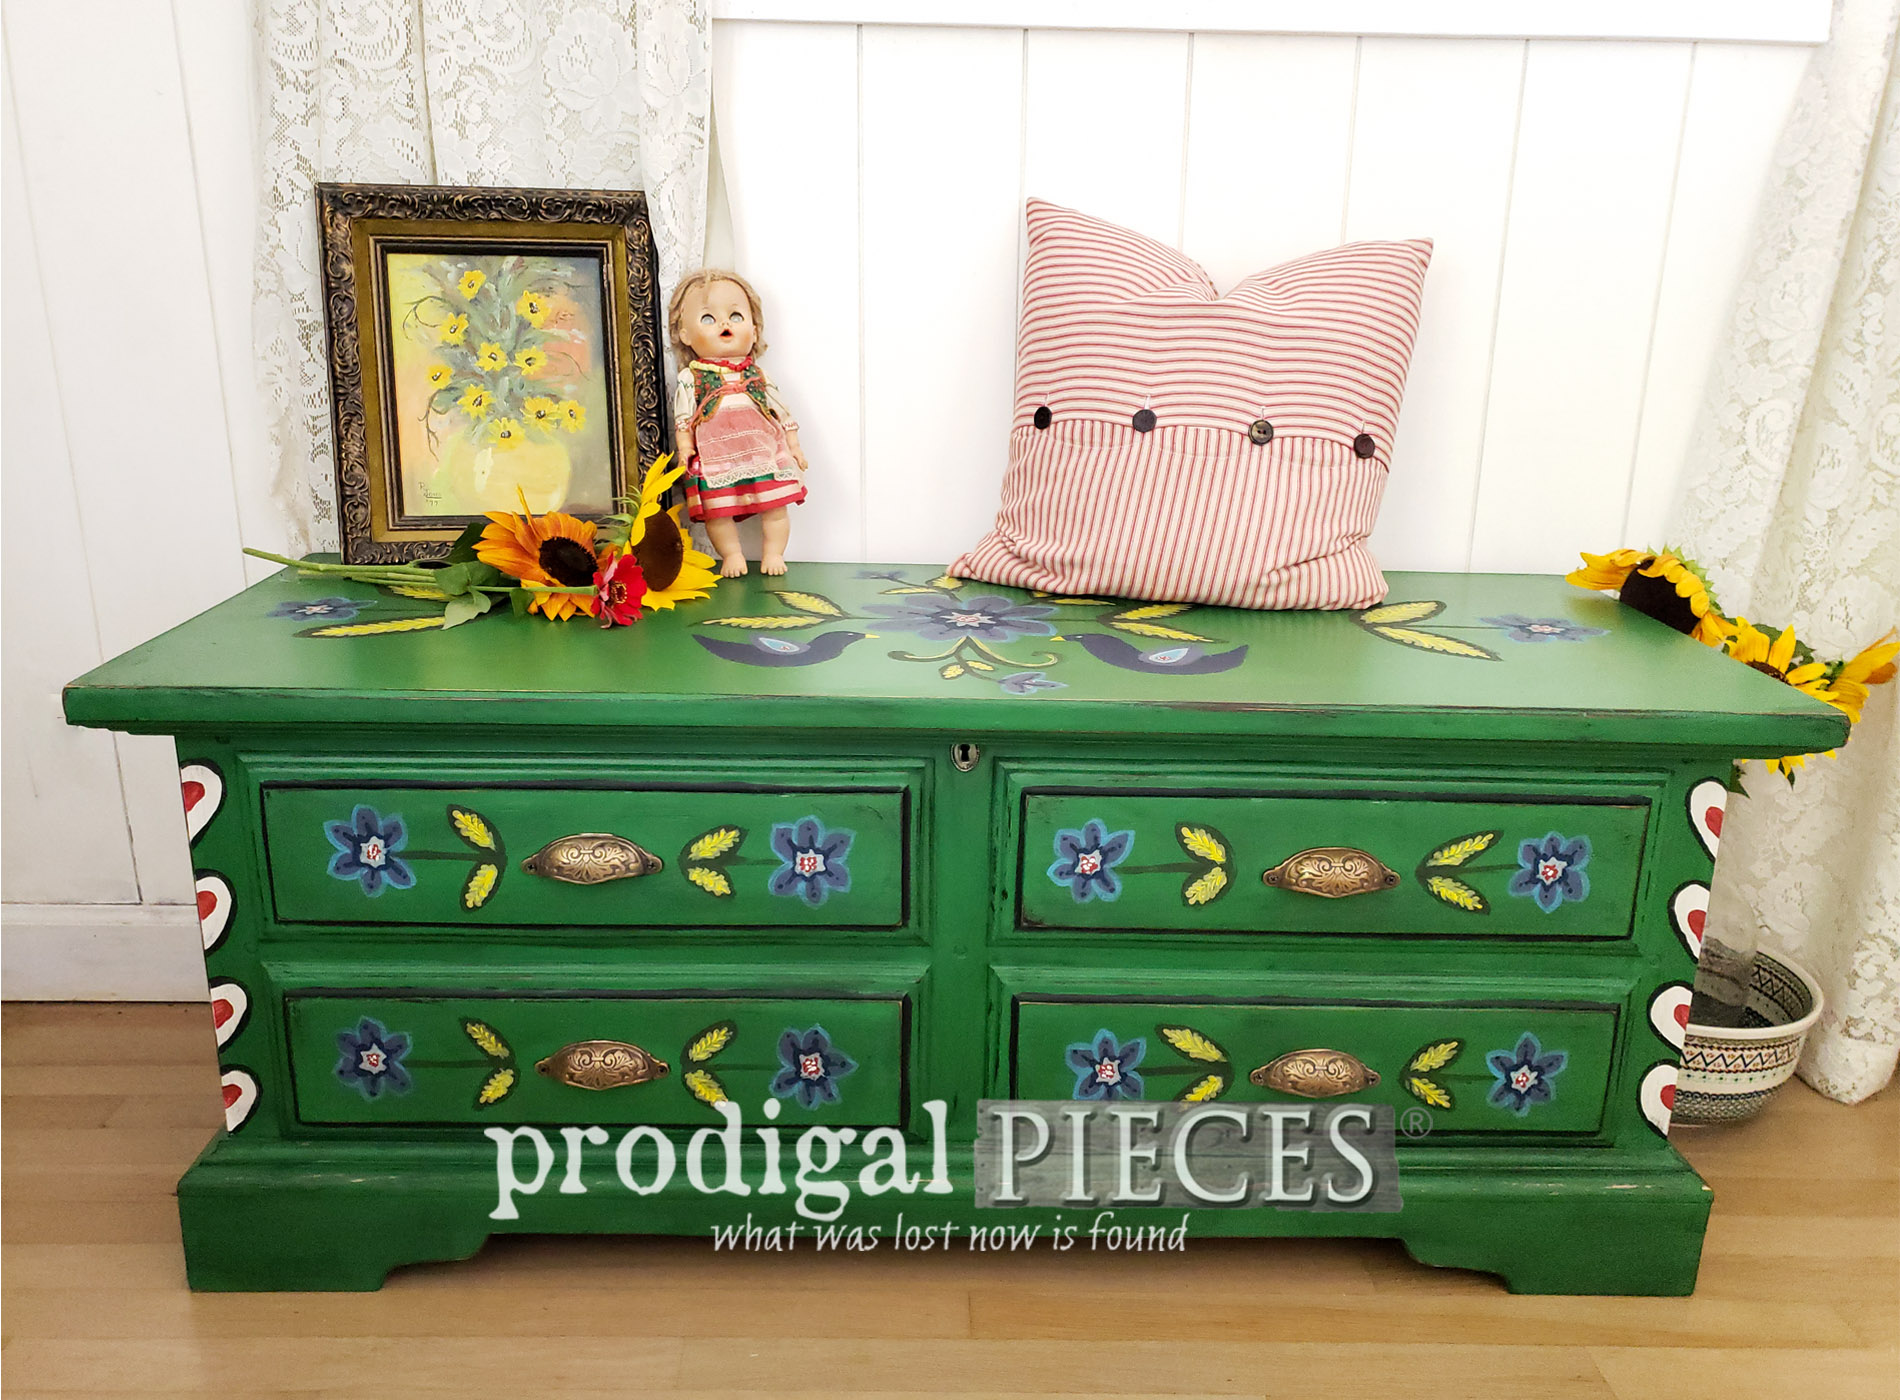 Featured Vintage Blanket Chest with Hand-Painted Folk Art Design by Larissa of Prodigal Pieces | prodigalpieces.com